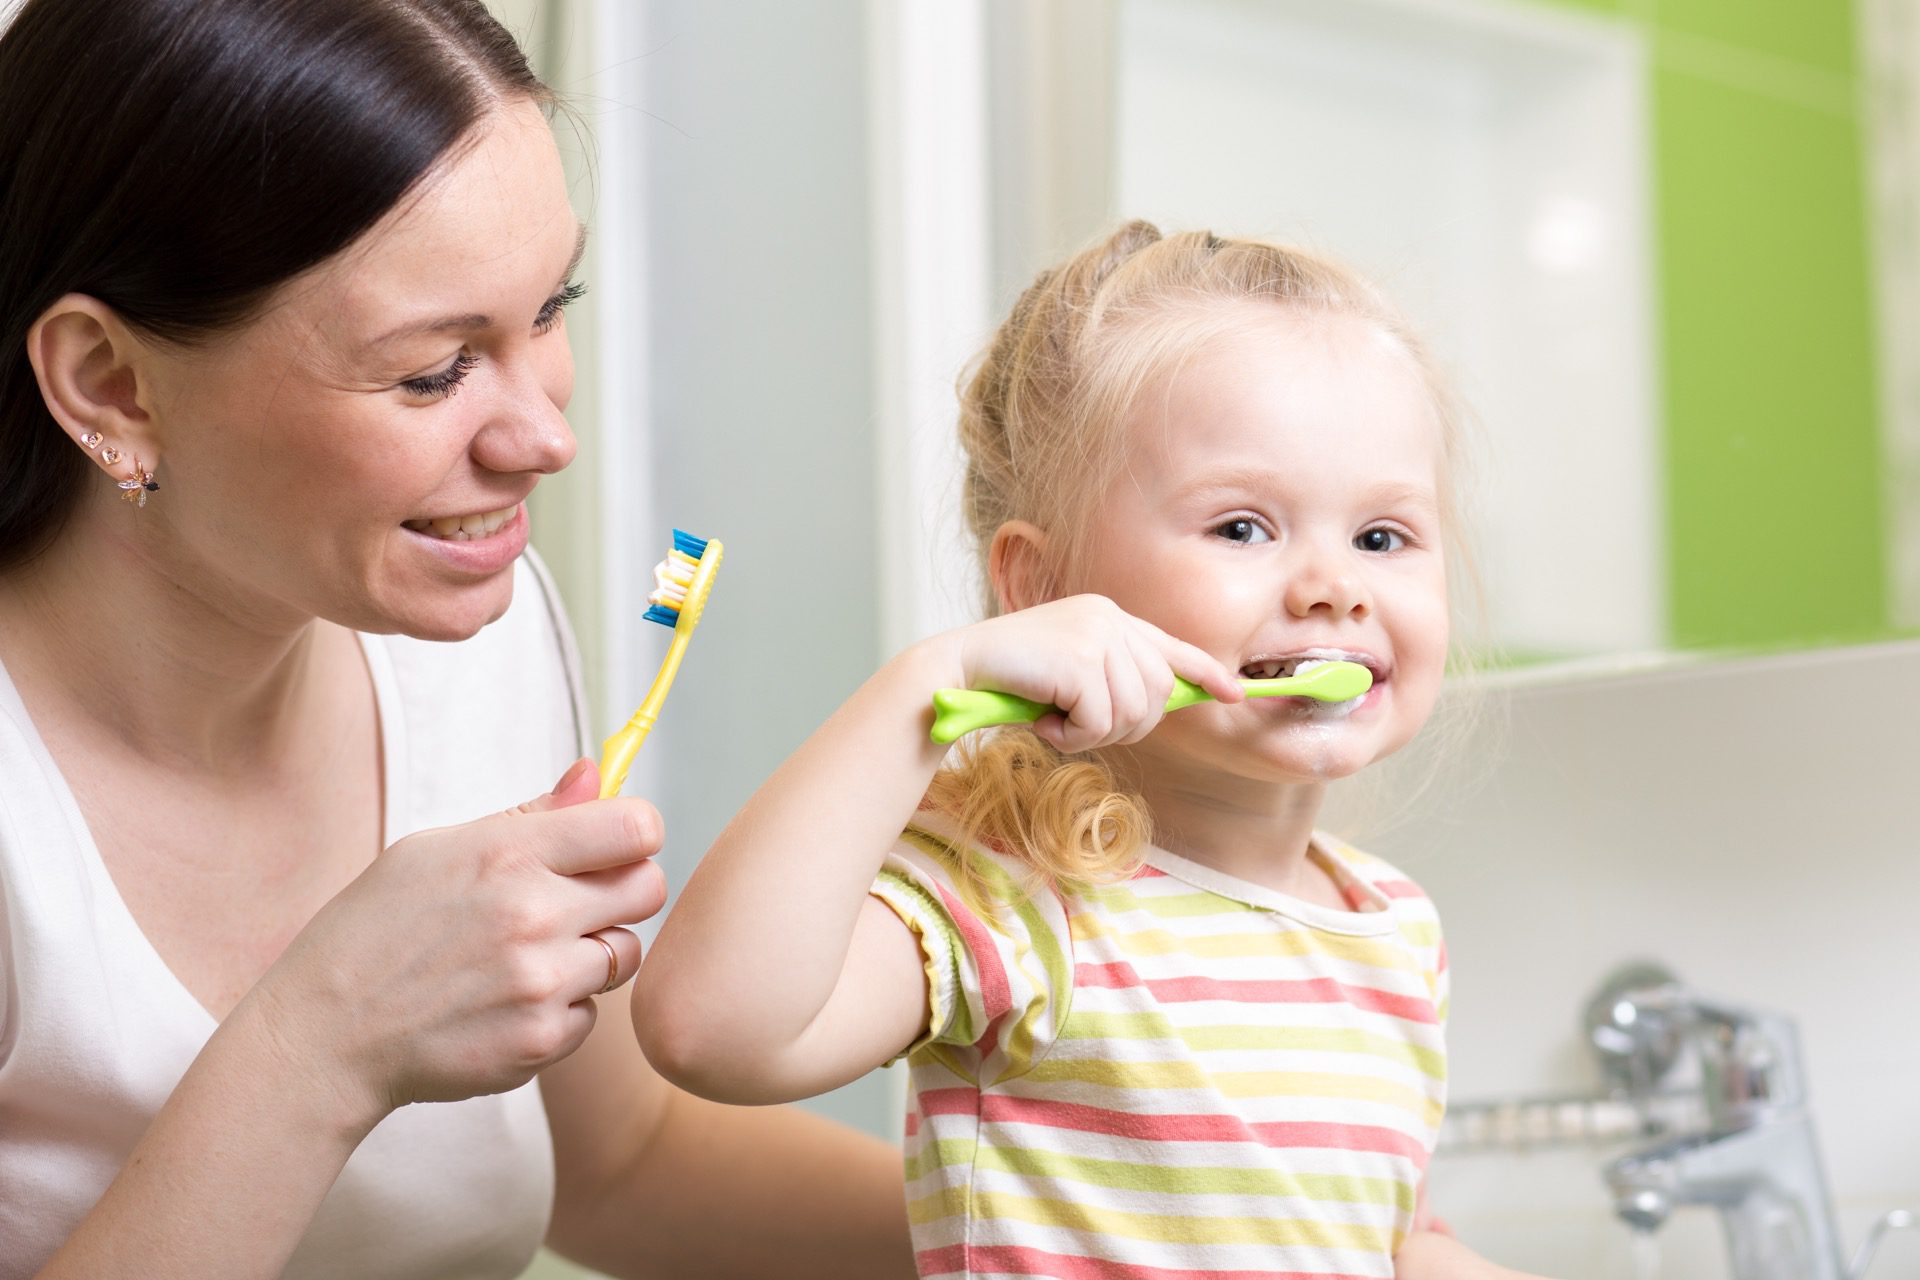 Mother teaching toddler how to brush teeth after noticing white spots on her toddler's teeth